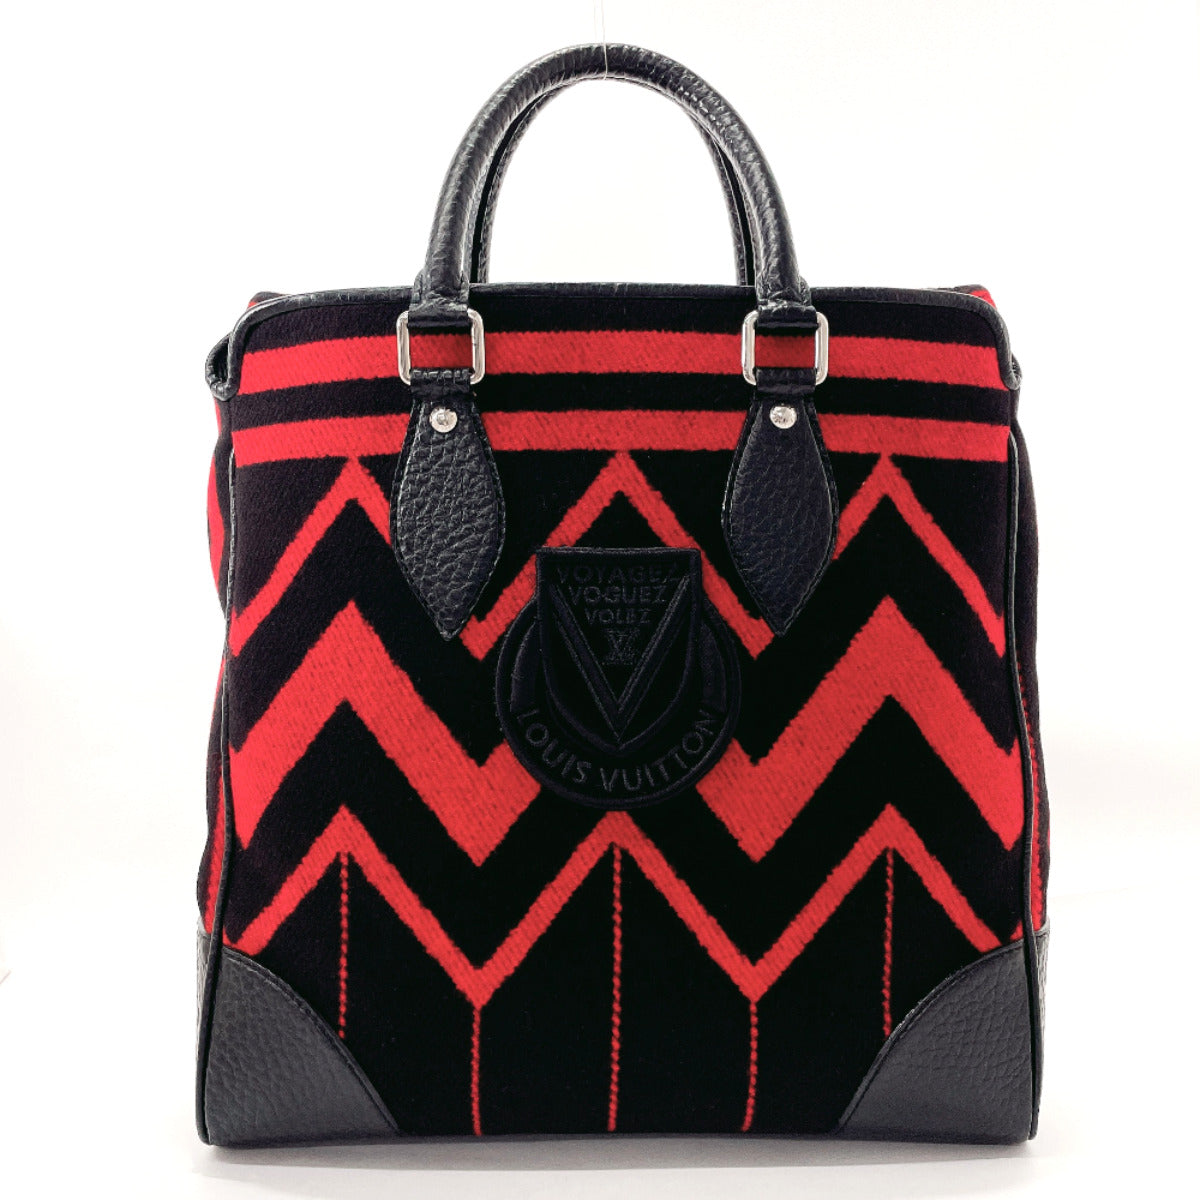 louis vuitton red tote bag